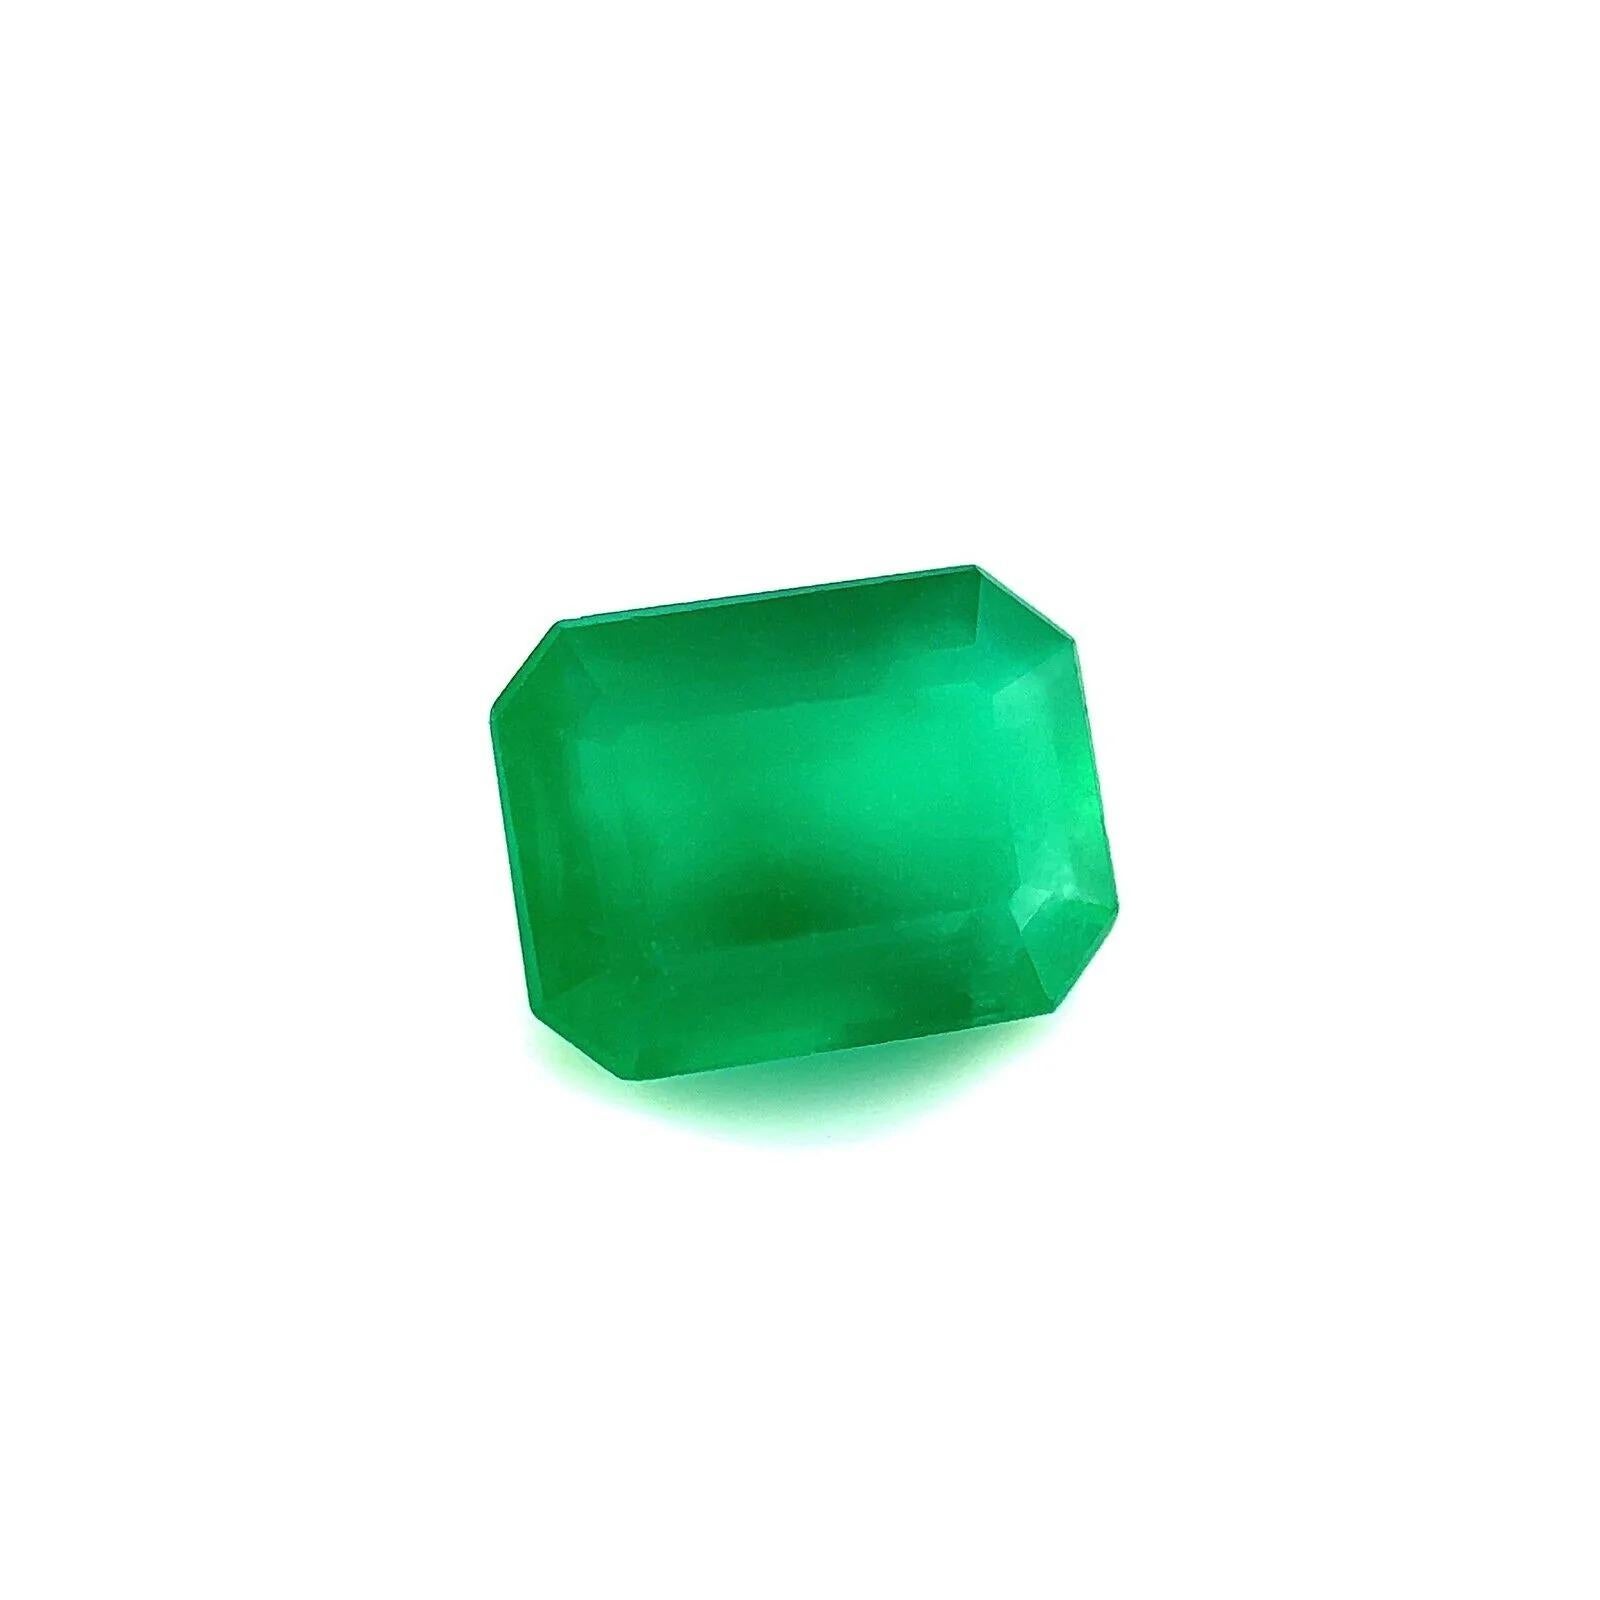 GIA Certified 1.48ct Natural Green Emerald Octagonal Emerald Cut Loose Gem

GIA Certified Natural Green Emerald Gemstone.
1.48 Carat emerald with a fine intense green colour and excellent clarity. Very clean stone with only some small natural